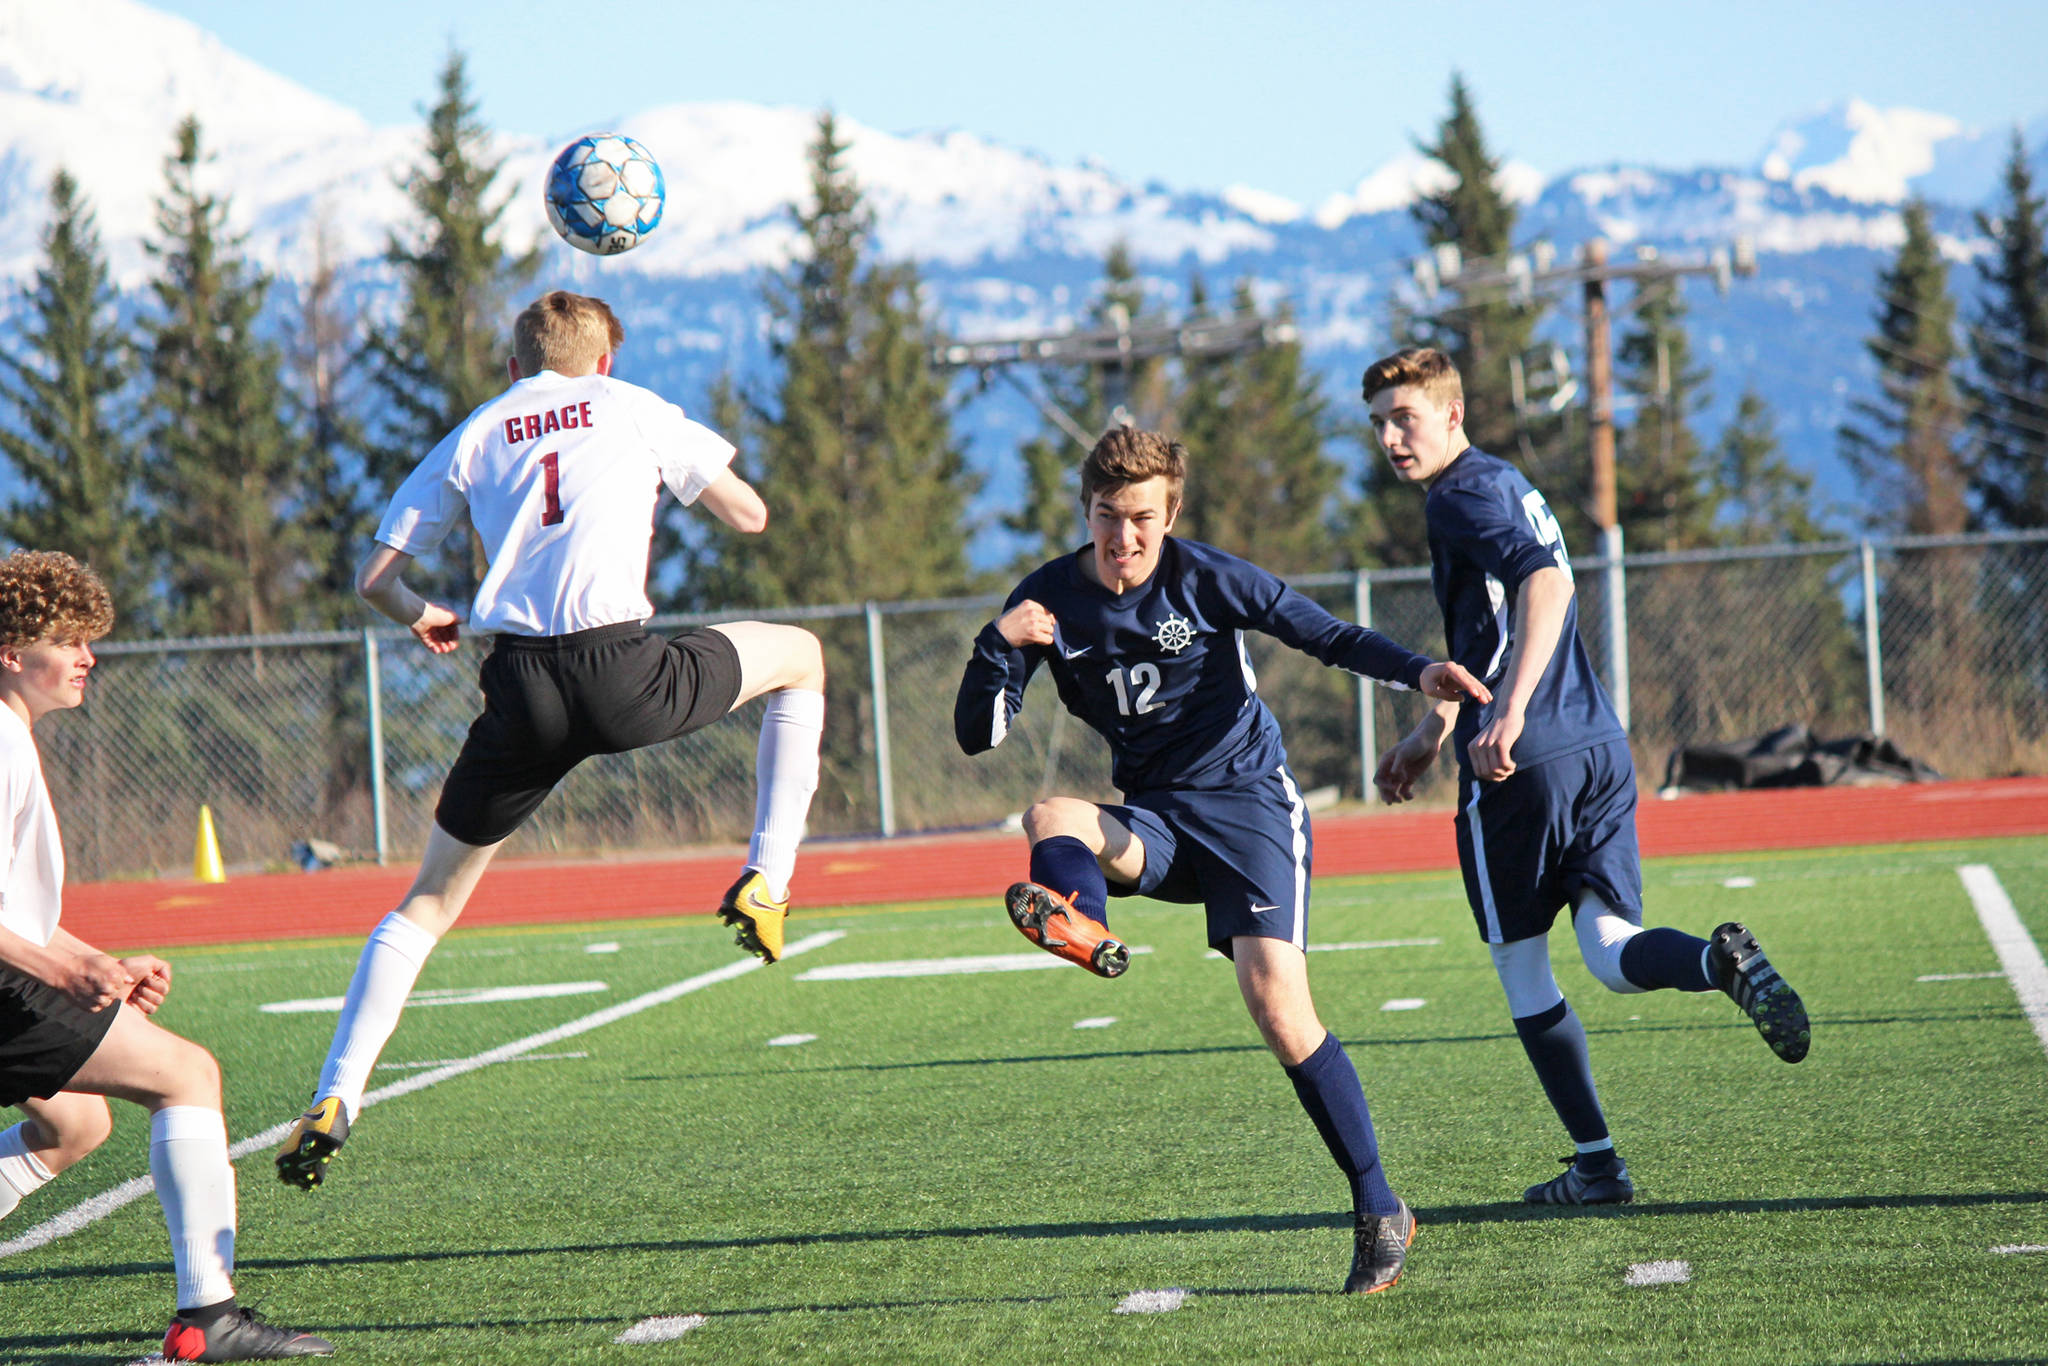 In Homer High School Mariner’s varsity soccer game against Grace Christian on Friday, April 26, 2019, at the high school in Homer, Alaska, Daniel Reutov, 12, battles for control of the ball, with teammate Ethan Pitzman, 15, ready to assist. (Photo by McKibben Jackinsky)